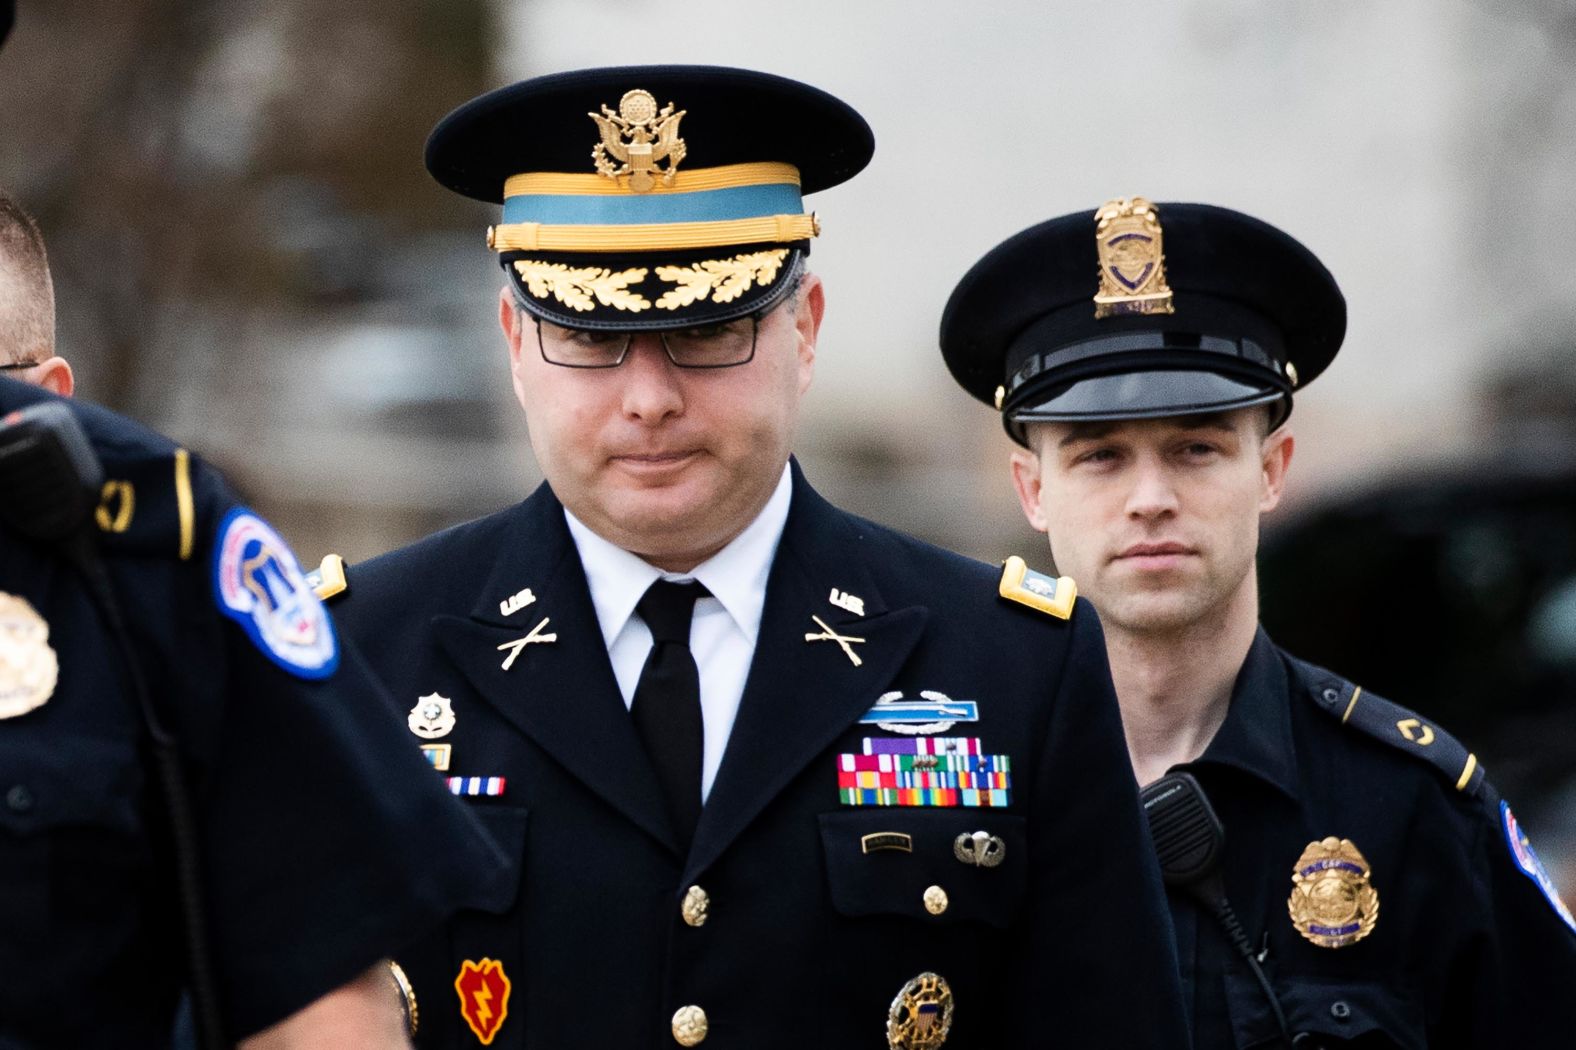 Army Lt. Col. Alexander Vindman, the top White House Ukraine expert, arrives on Capitol Hill on October 29. According to two sources present at <a href="https://www.cnn.com/2019/10/30/politics/vindman-ukraine-aid-trump-investigations/index.html" target="_blank">his deposition,</a> Vindman told congressional investigators that he was convinced that a quid pro quo existed by July 10, which was before the Trump-Zelensky phone call that is now at the heart of the impeachment inquiry. 